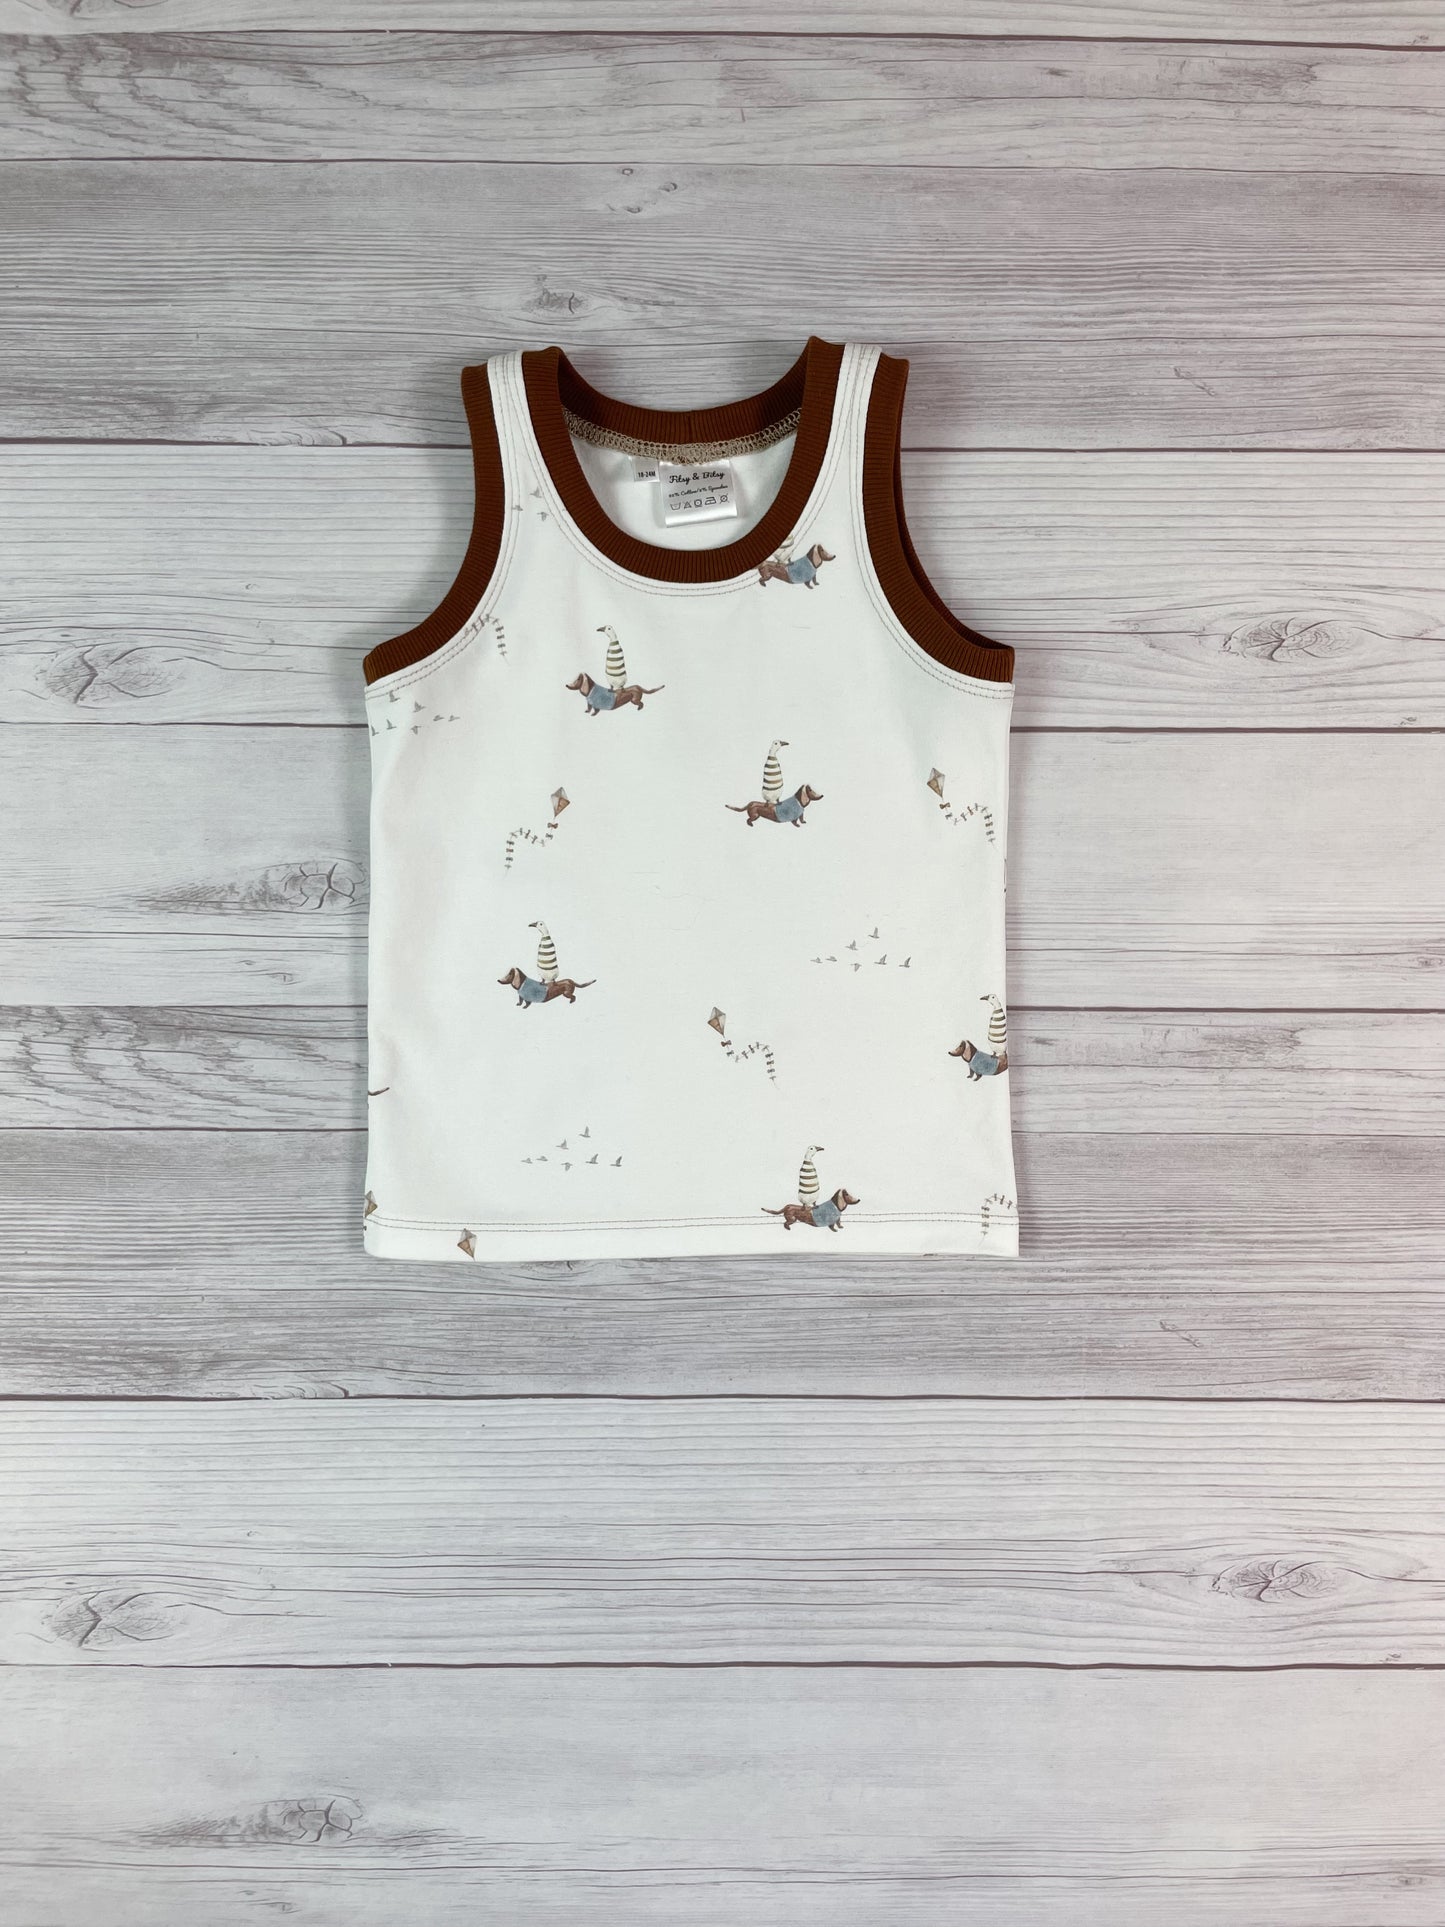 Dachshund and Goose Tank Top